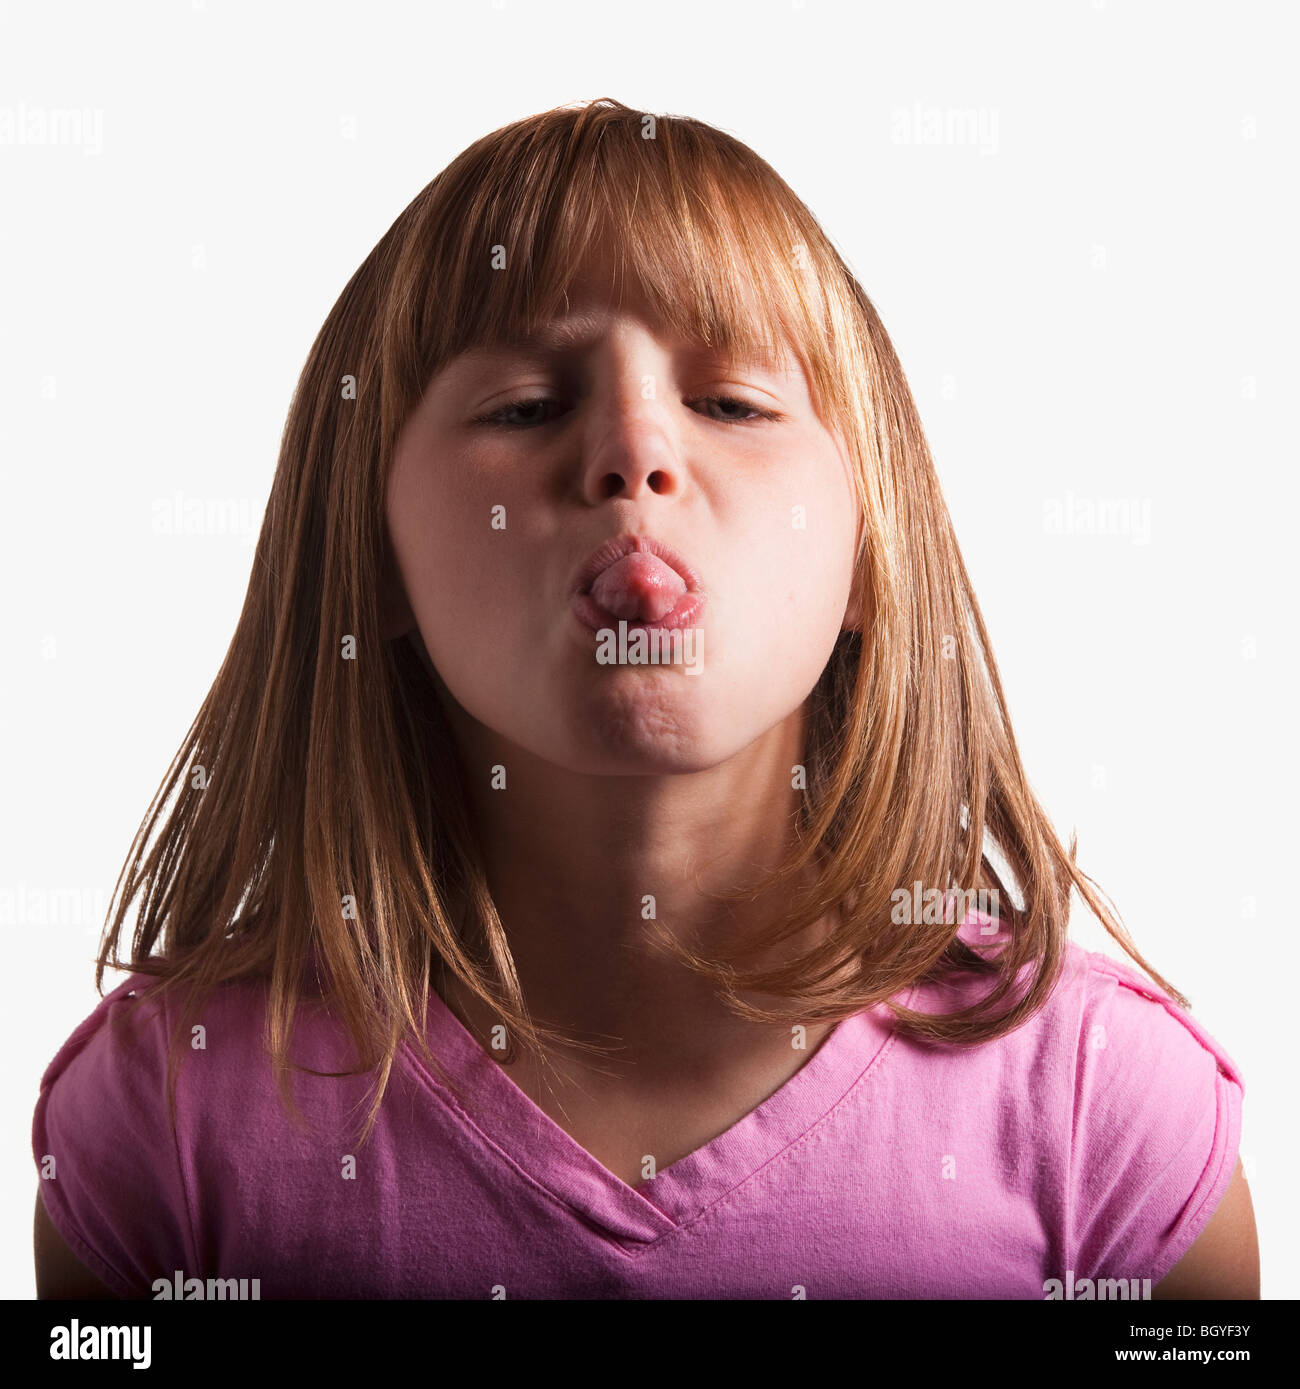 Young girl sticking tongue out Stock Photo